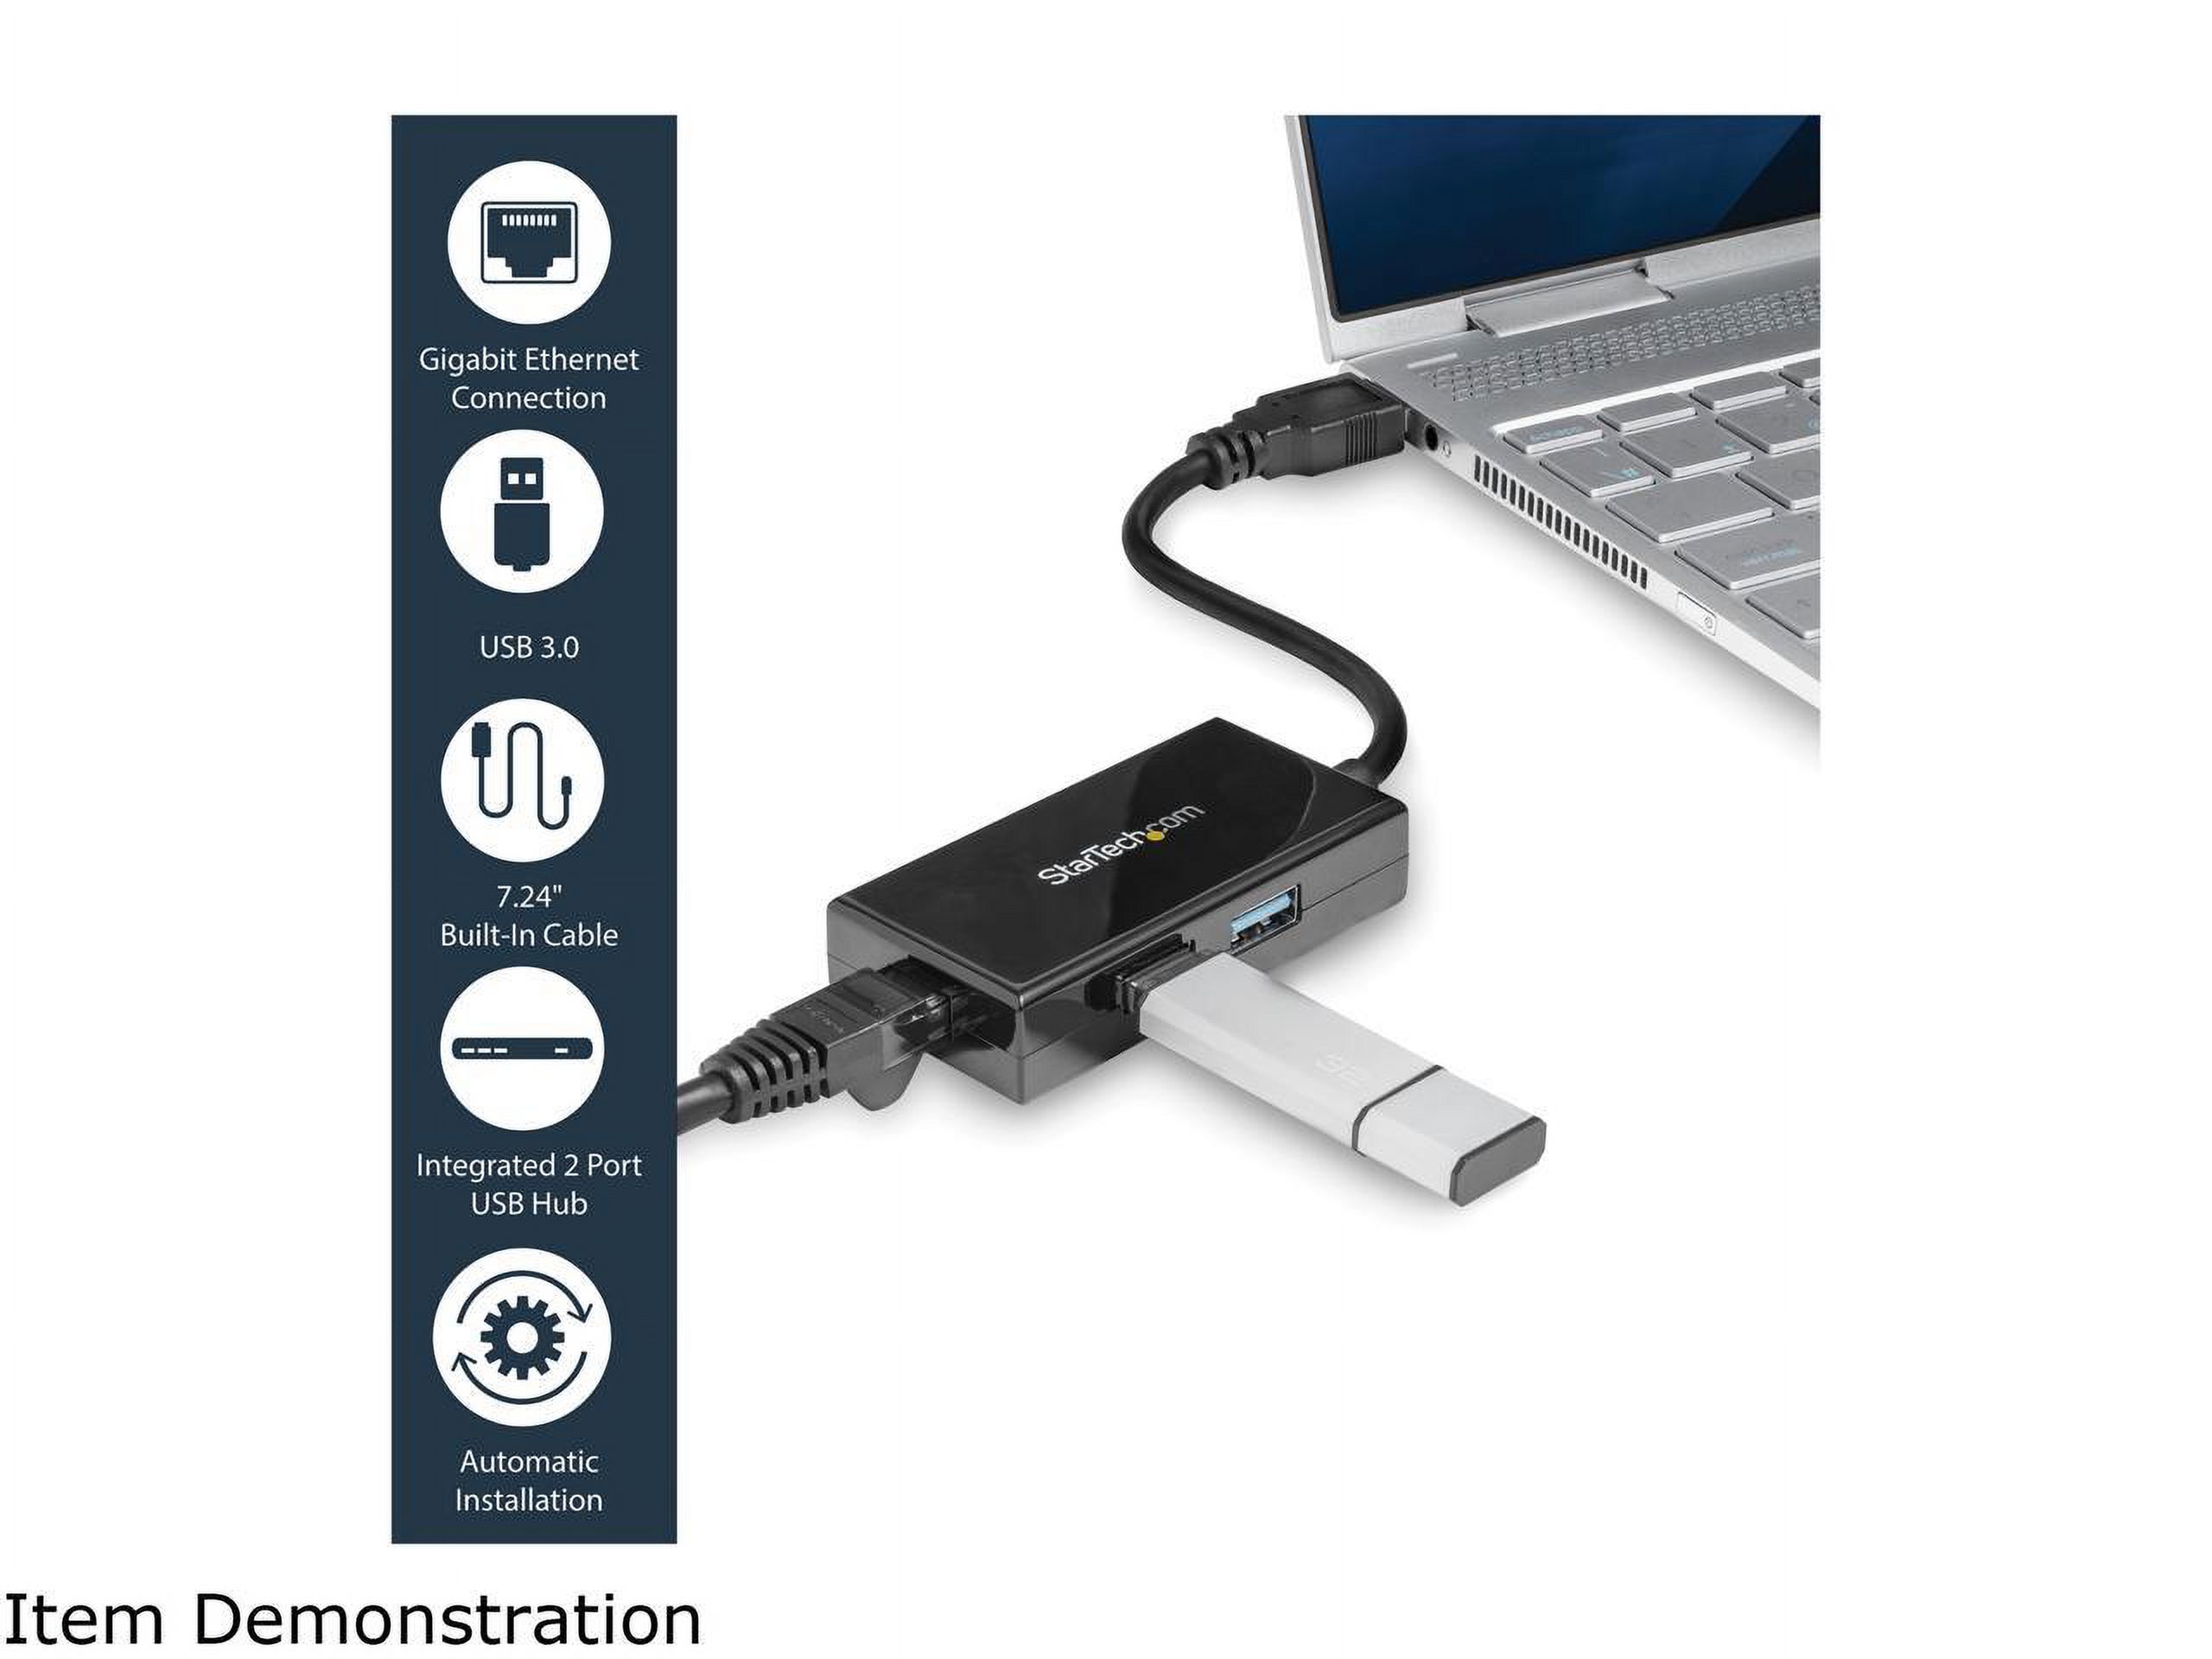 Startech USB 3.0 to Gigabit Network Adapter with Built-In 2-Port USB Hub - Native Driver Support (Windows, Mac and Chrome OS) - Add Gigabit Ethernet connectivity and two USB 3.0 ports to your lapto... - image 3 of 6